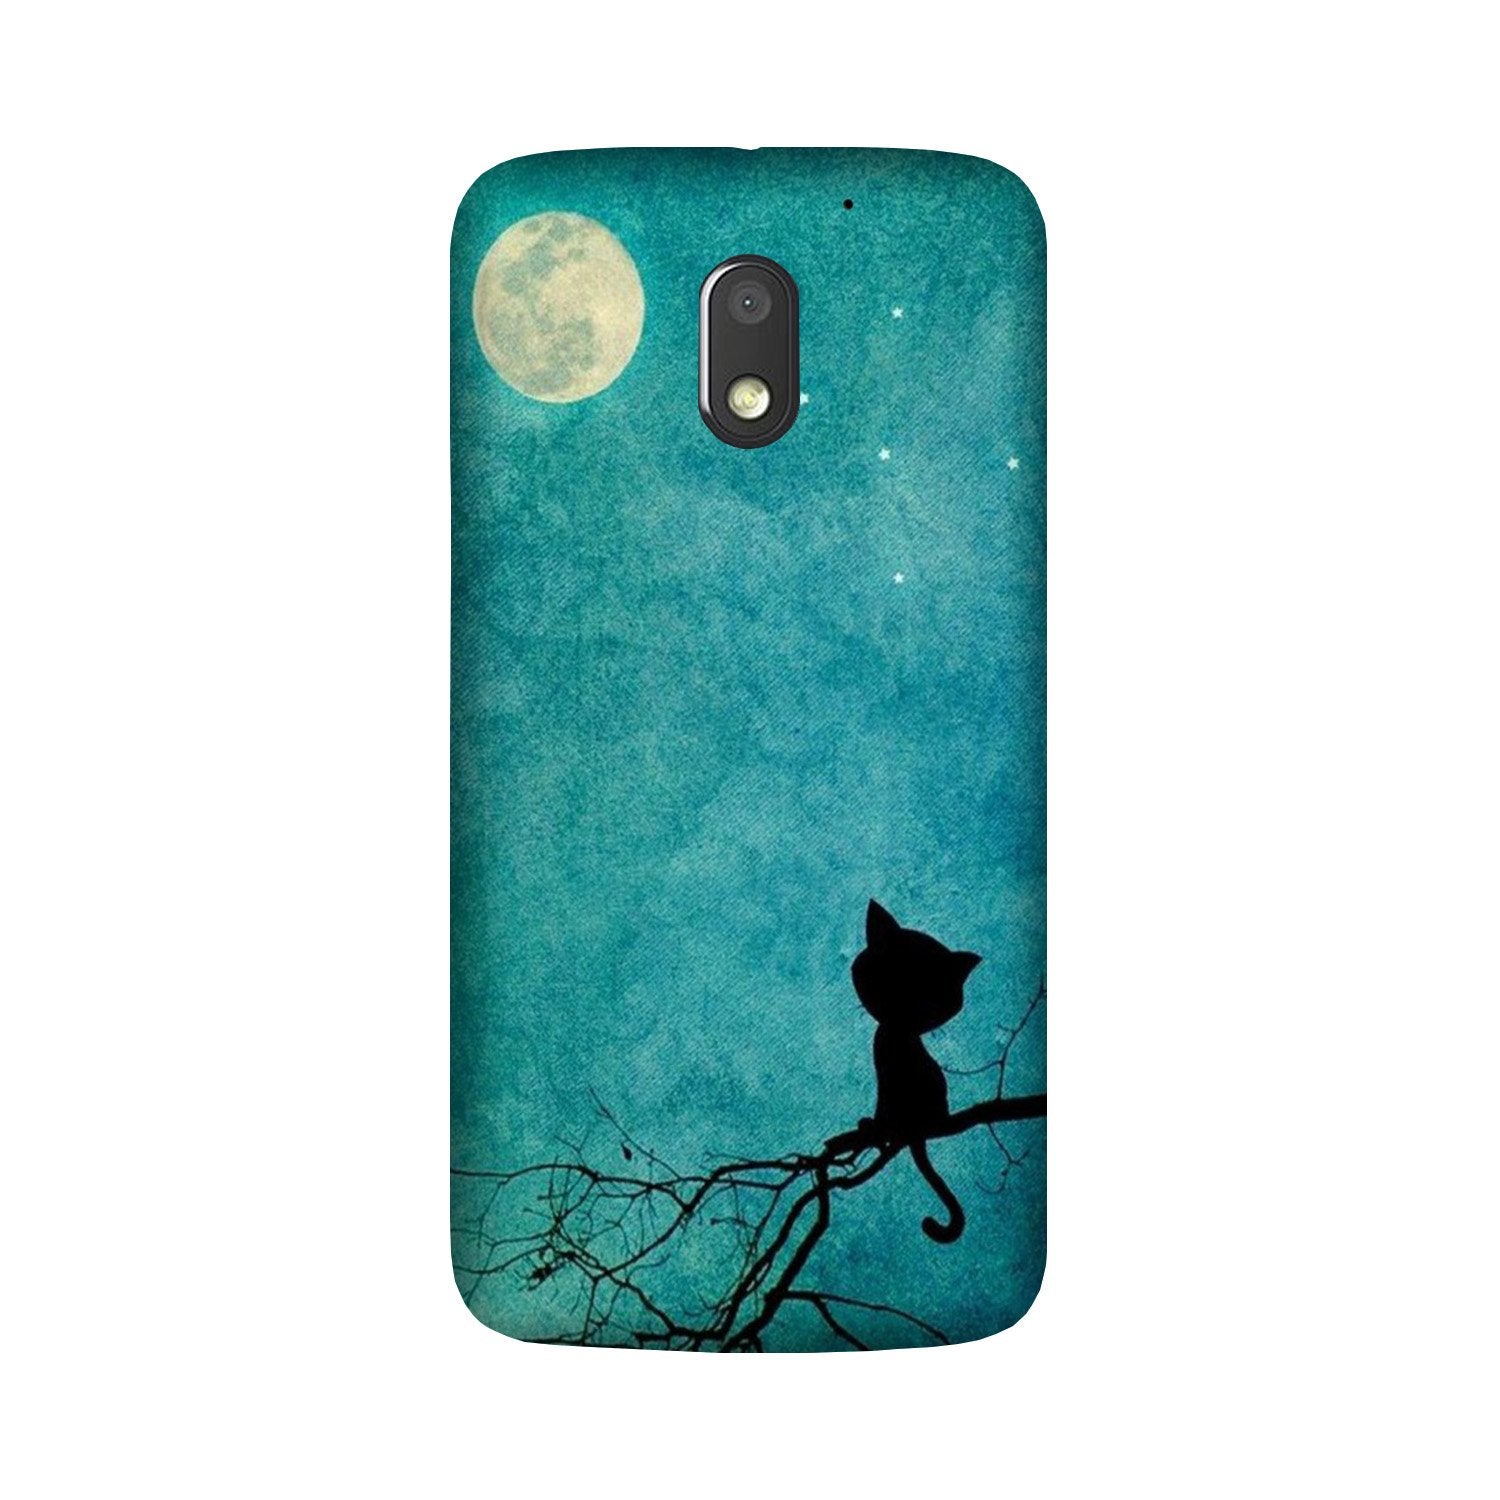 Moon cat Case for Moto G4 Play